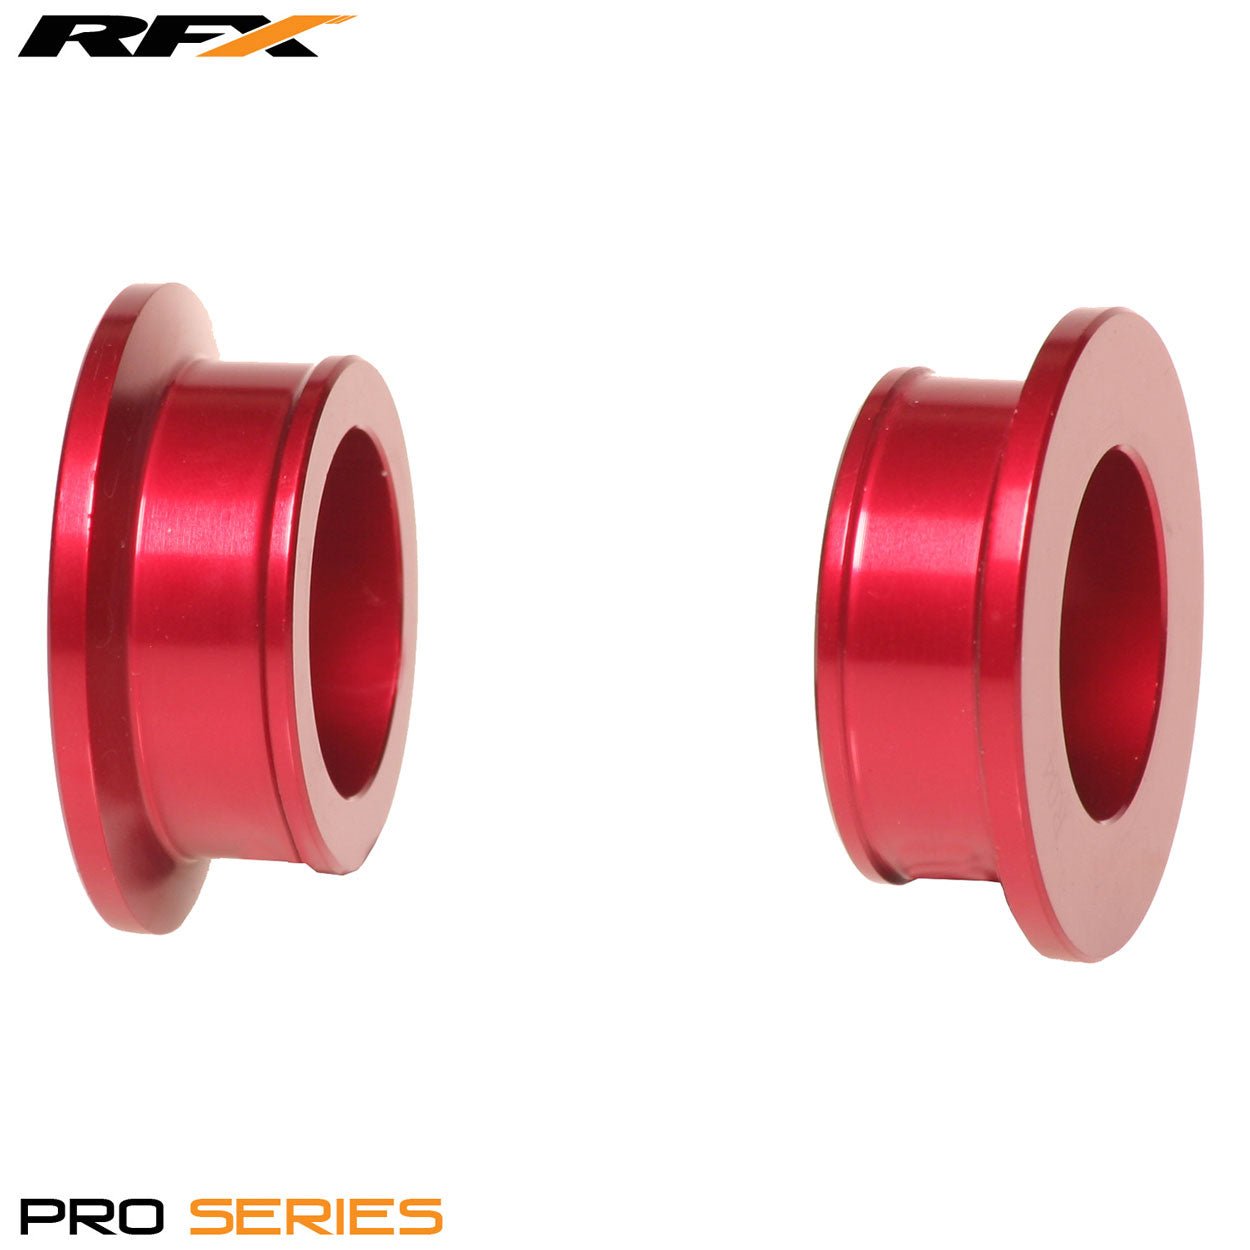 RFX Pro Wheel Spacers Rear (Red) RM125/250 01-08 - Red - RFX